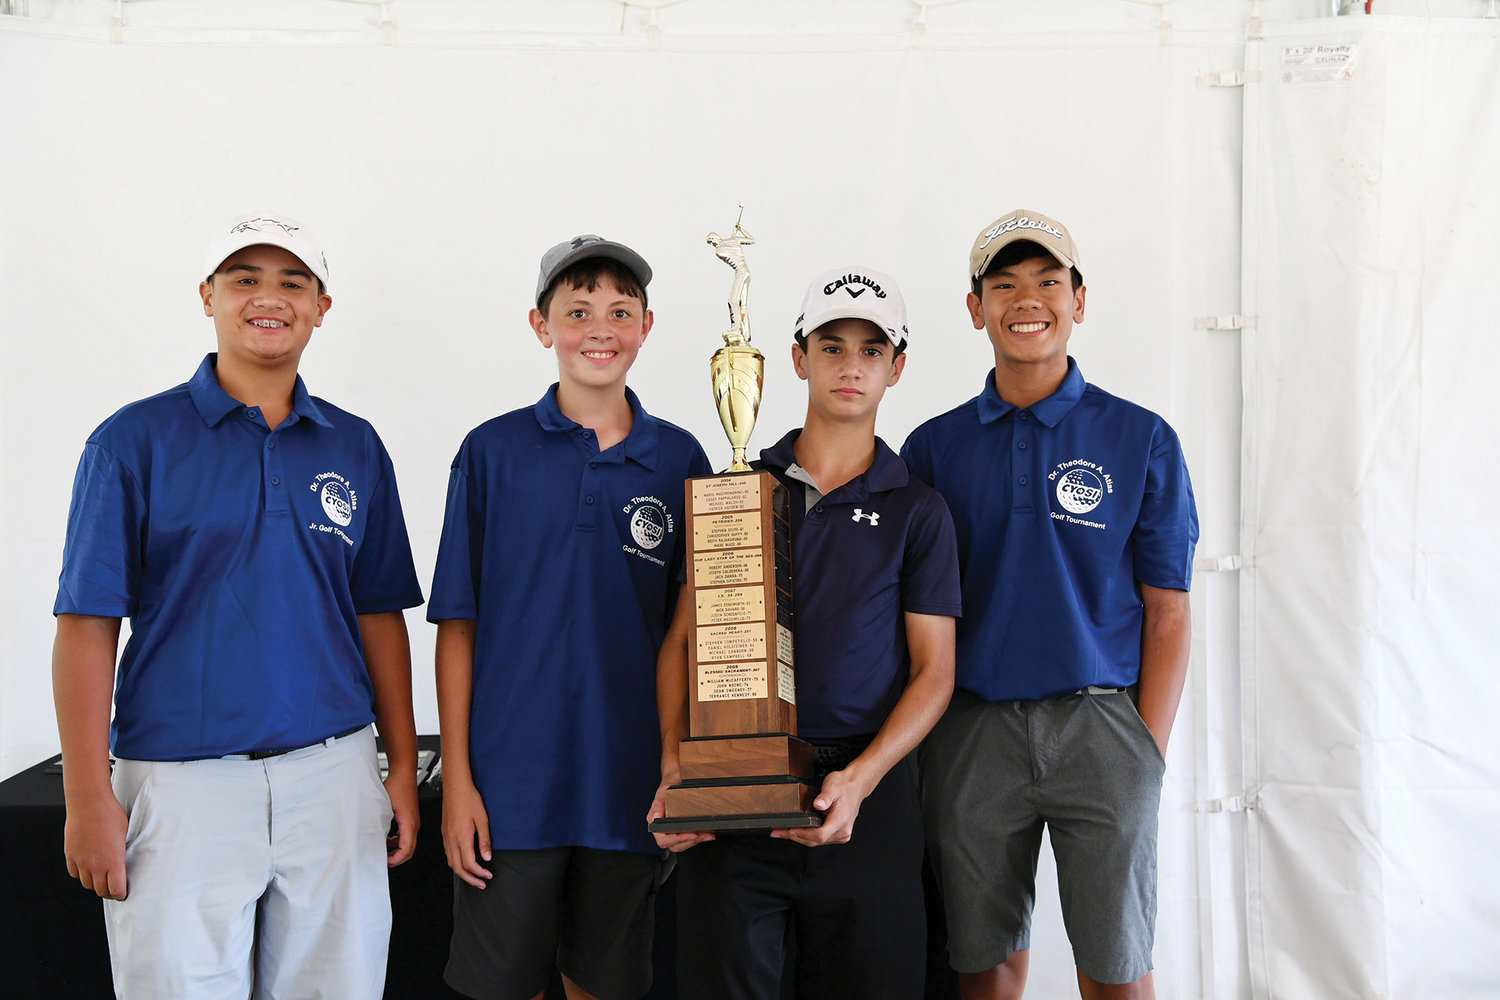 The winning boys’ team from IS 34 was, from left, Michael Hui, Sean Bailey, James Lamantia and Andrew Biscocho.